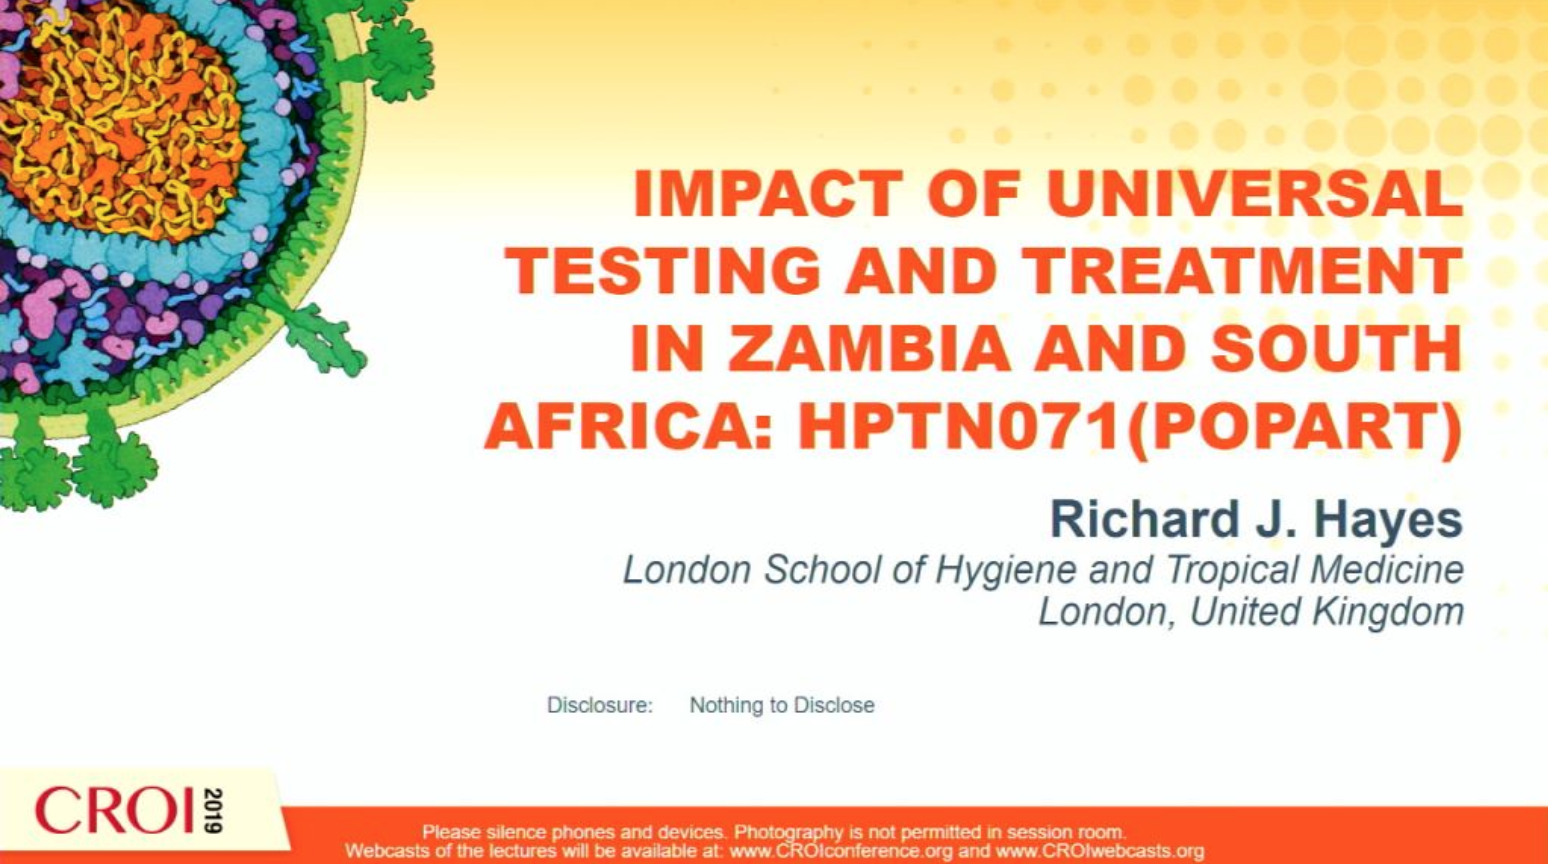 HIV Prevention Trial HPTN01 (PopART) Shows 30% Decline in New HIV Infection Rate